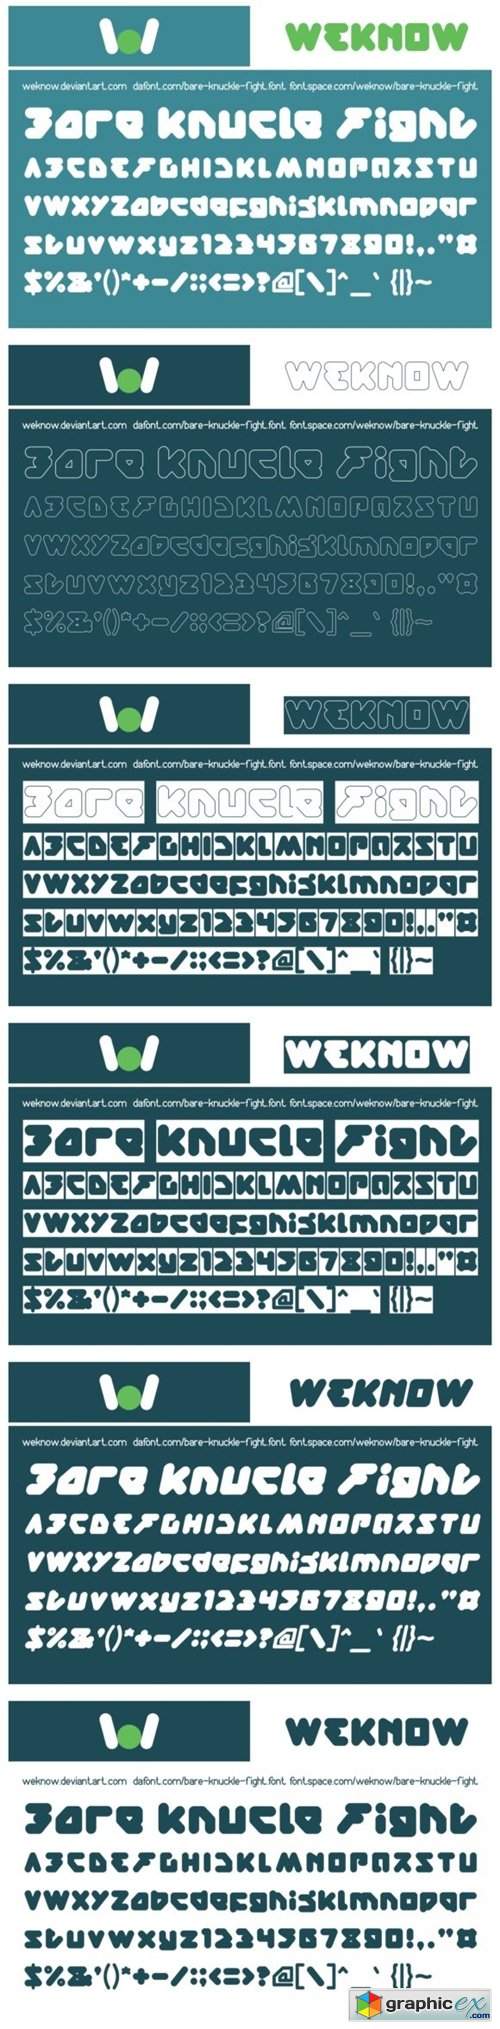  Bare Knuckle Fight Font 